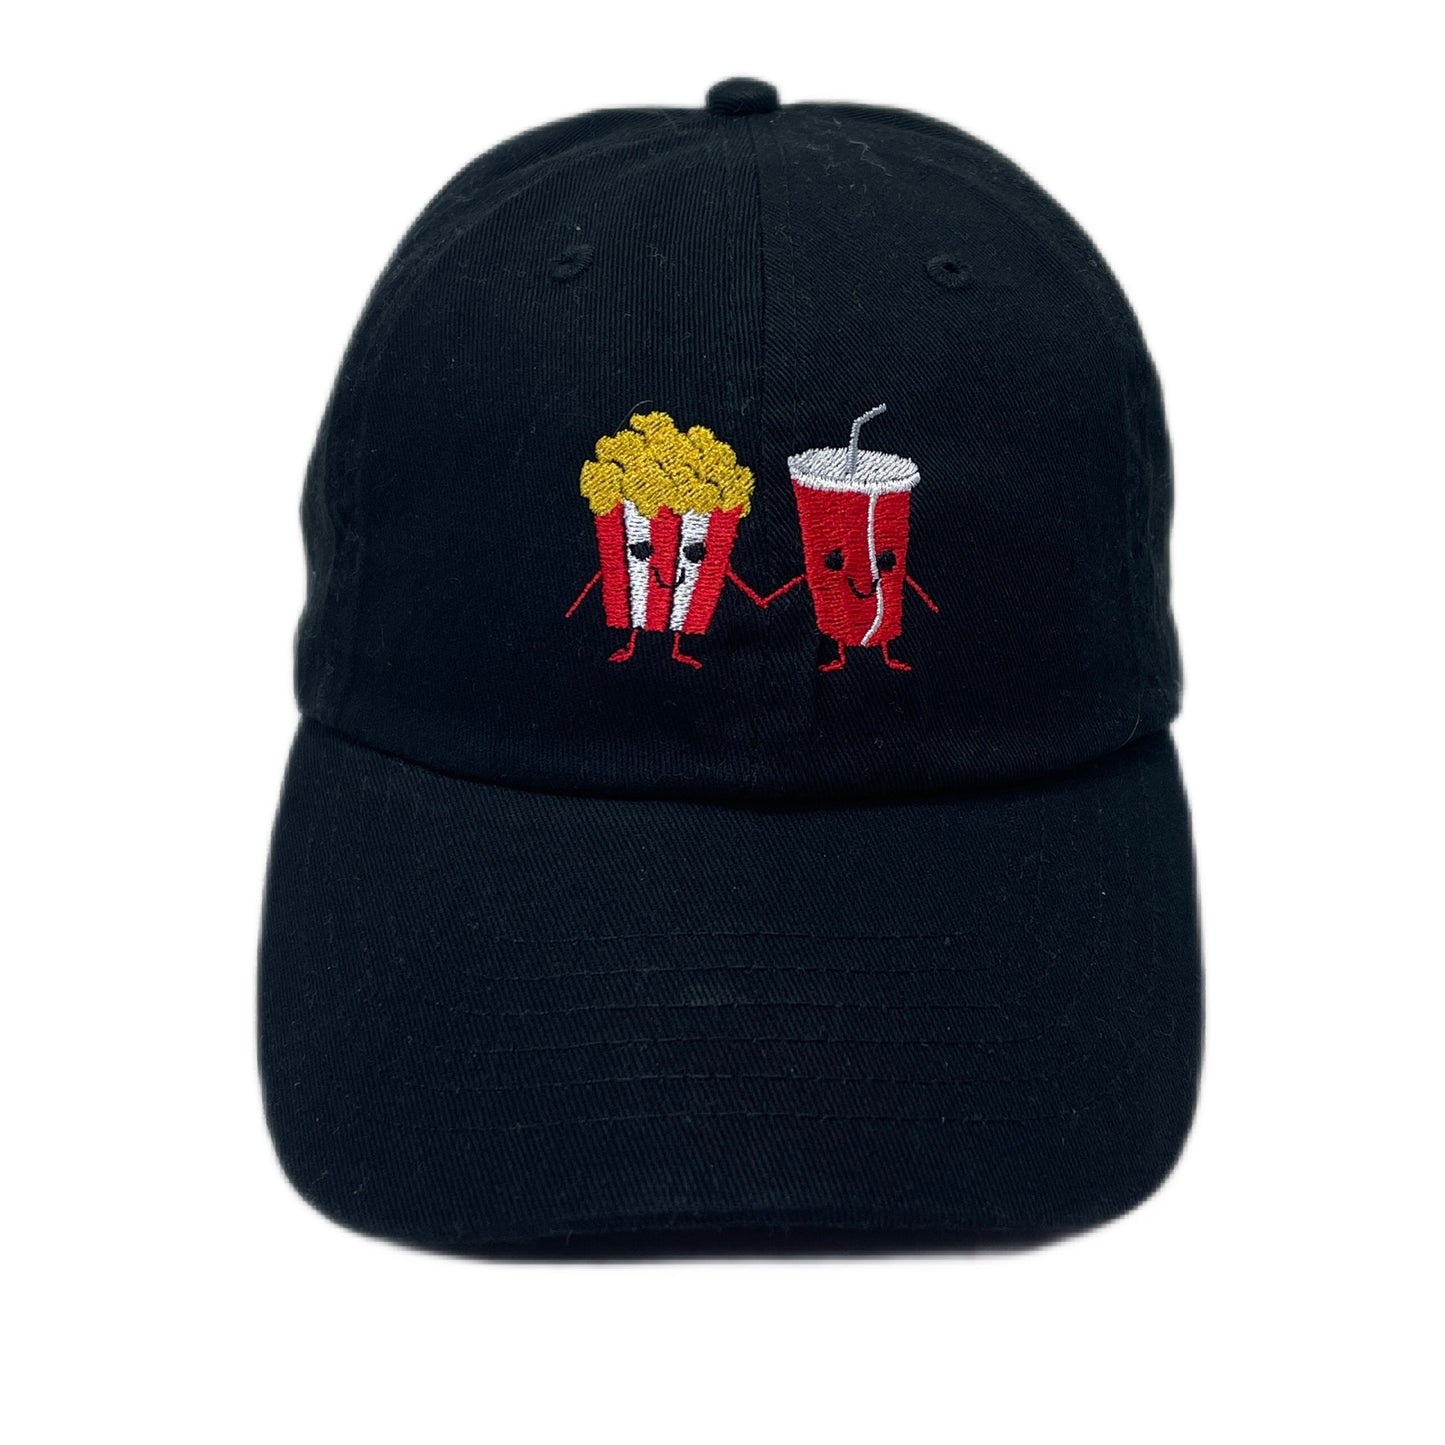 Popcorn and Soft Drink/Soda/Pop Couple - Classic Dad Hat - Several Colors